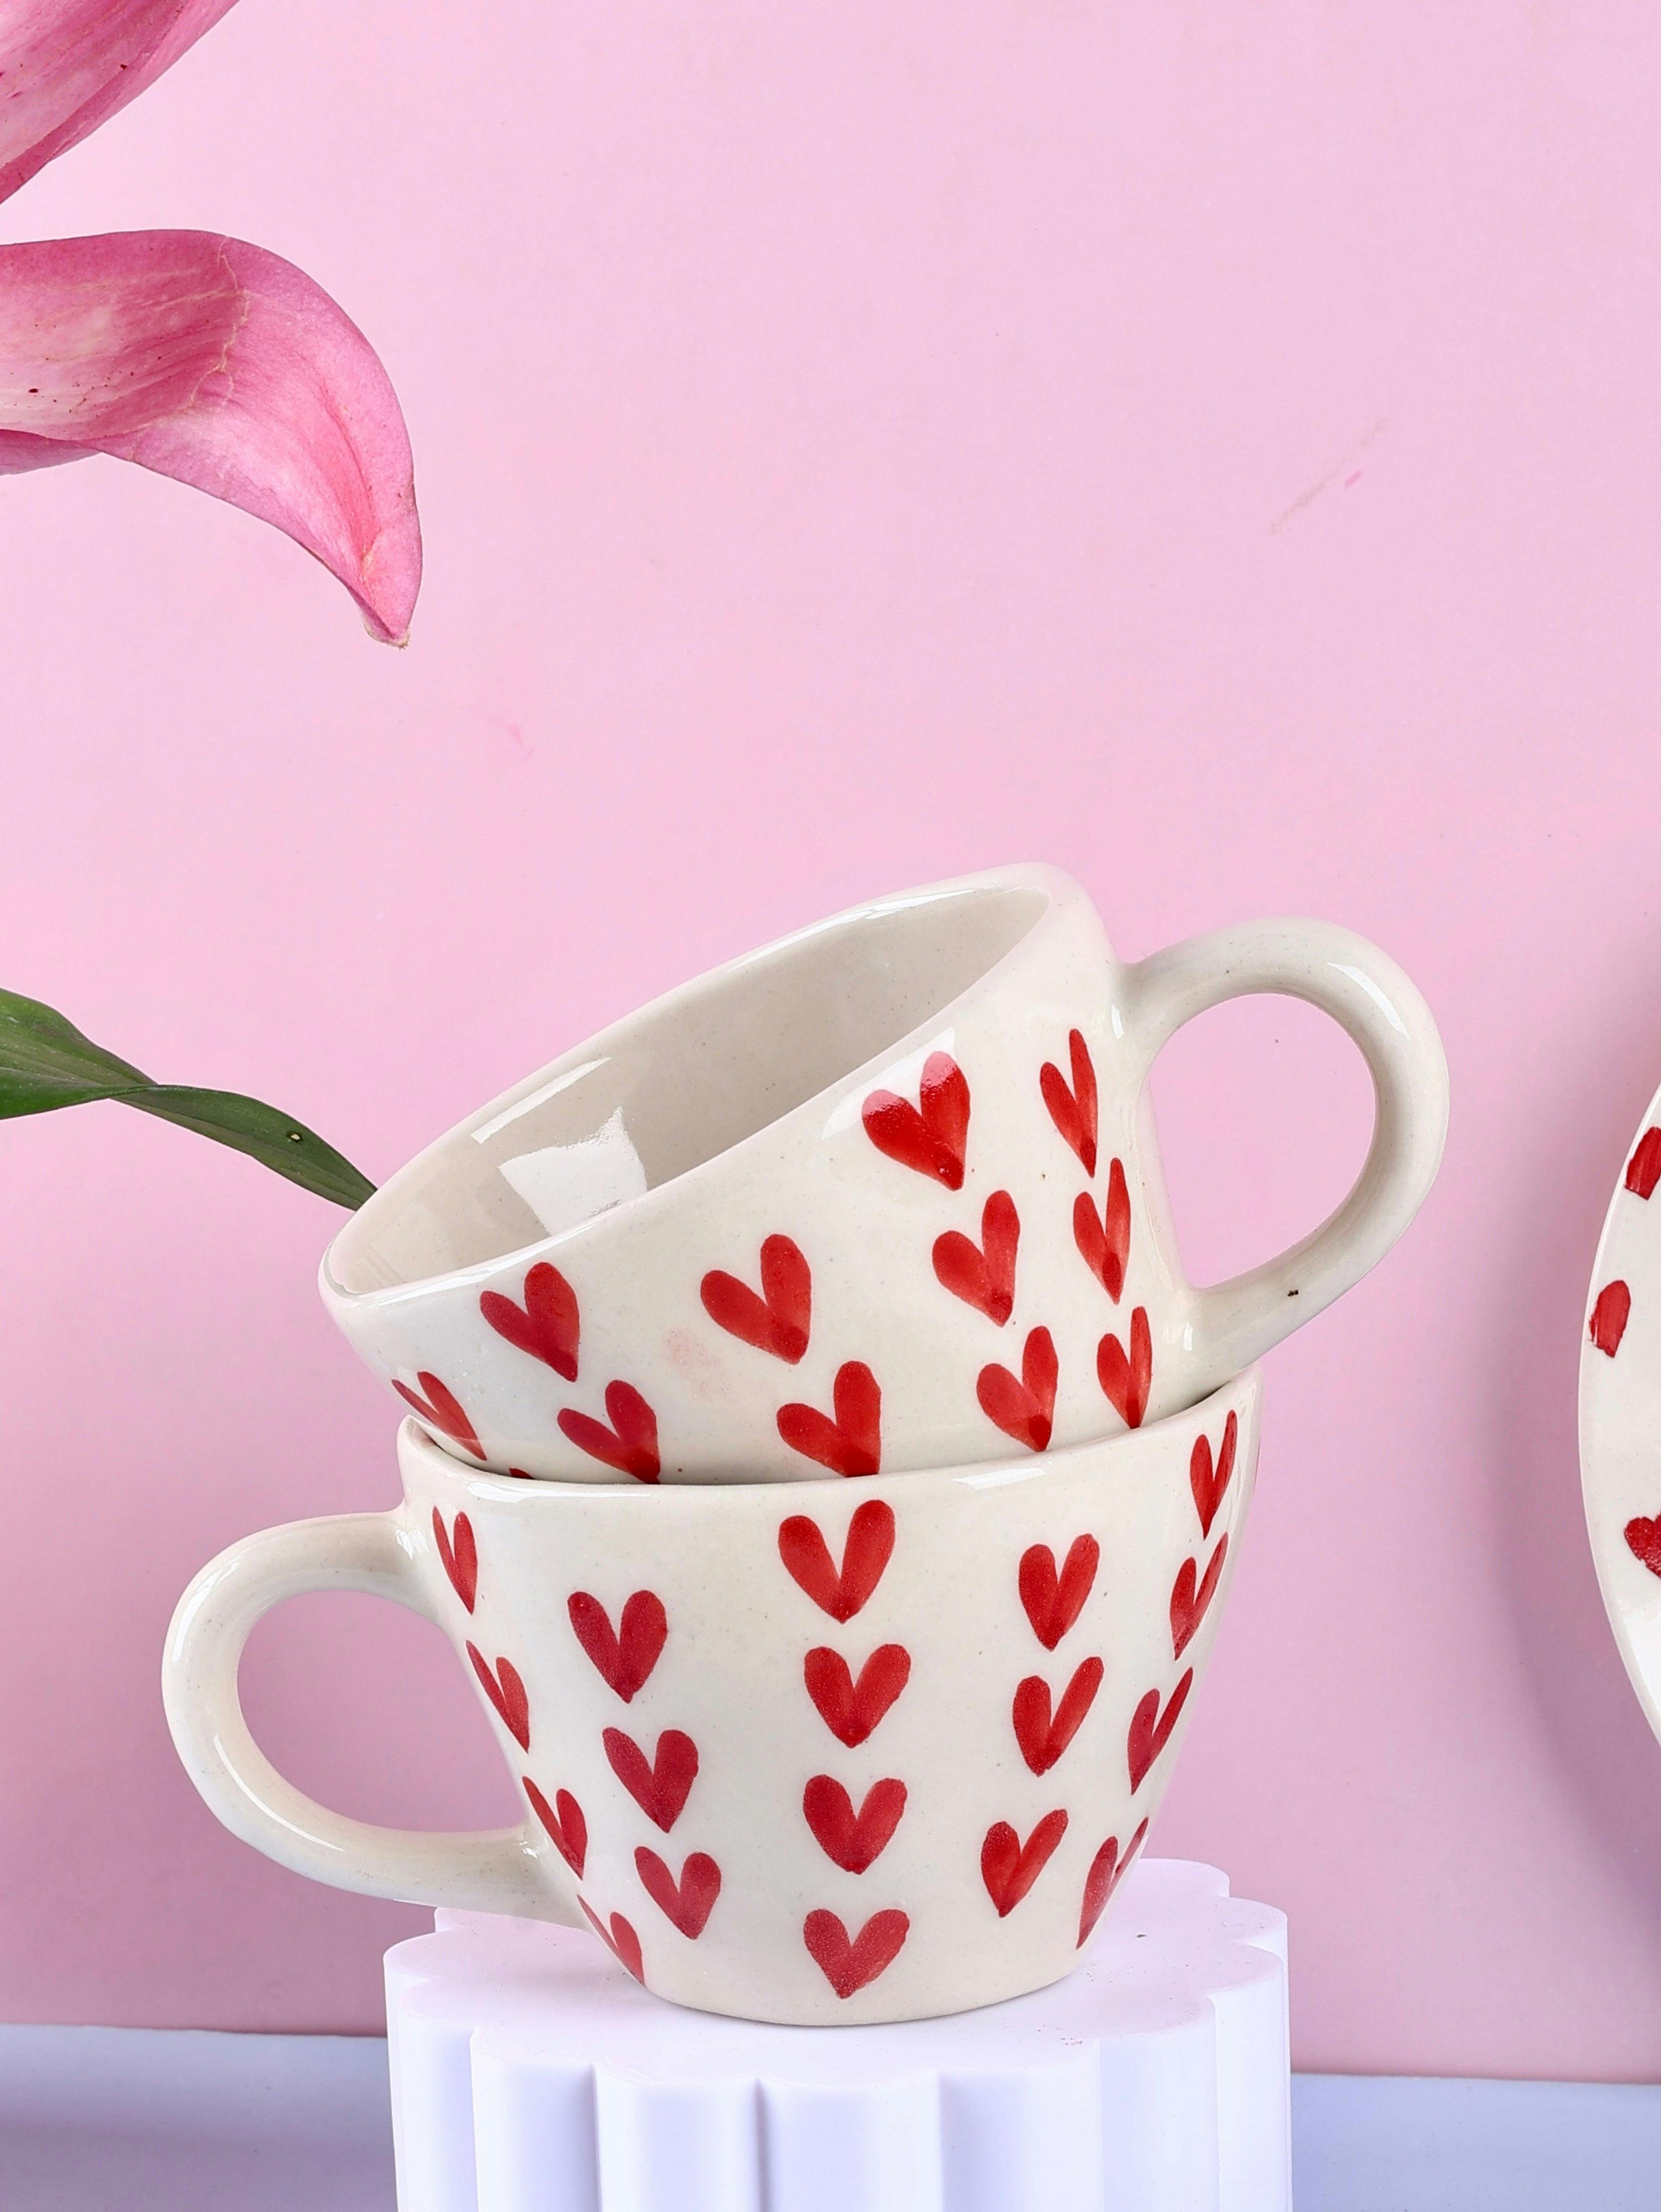 Beating Heart Handmade Mug, a product by Olive Home accent